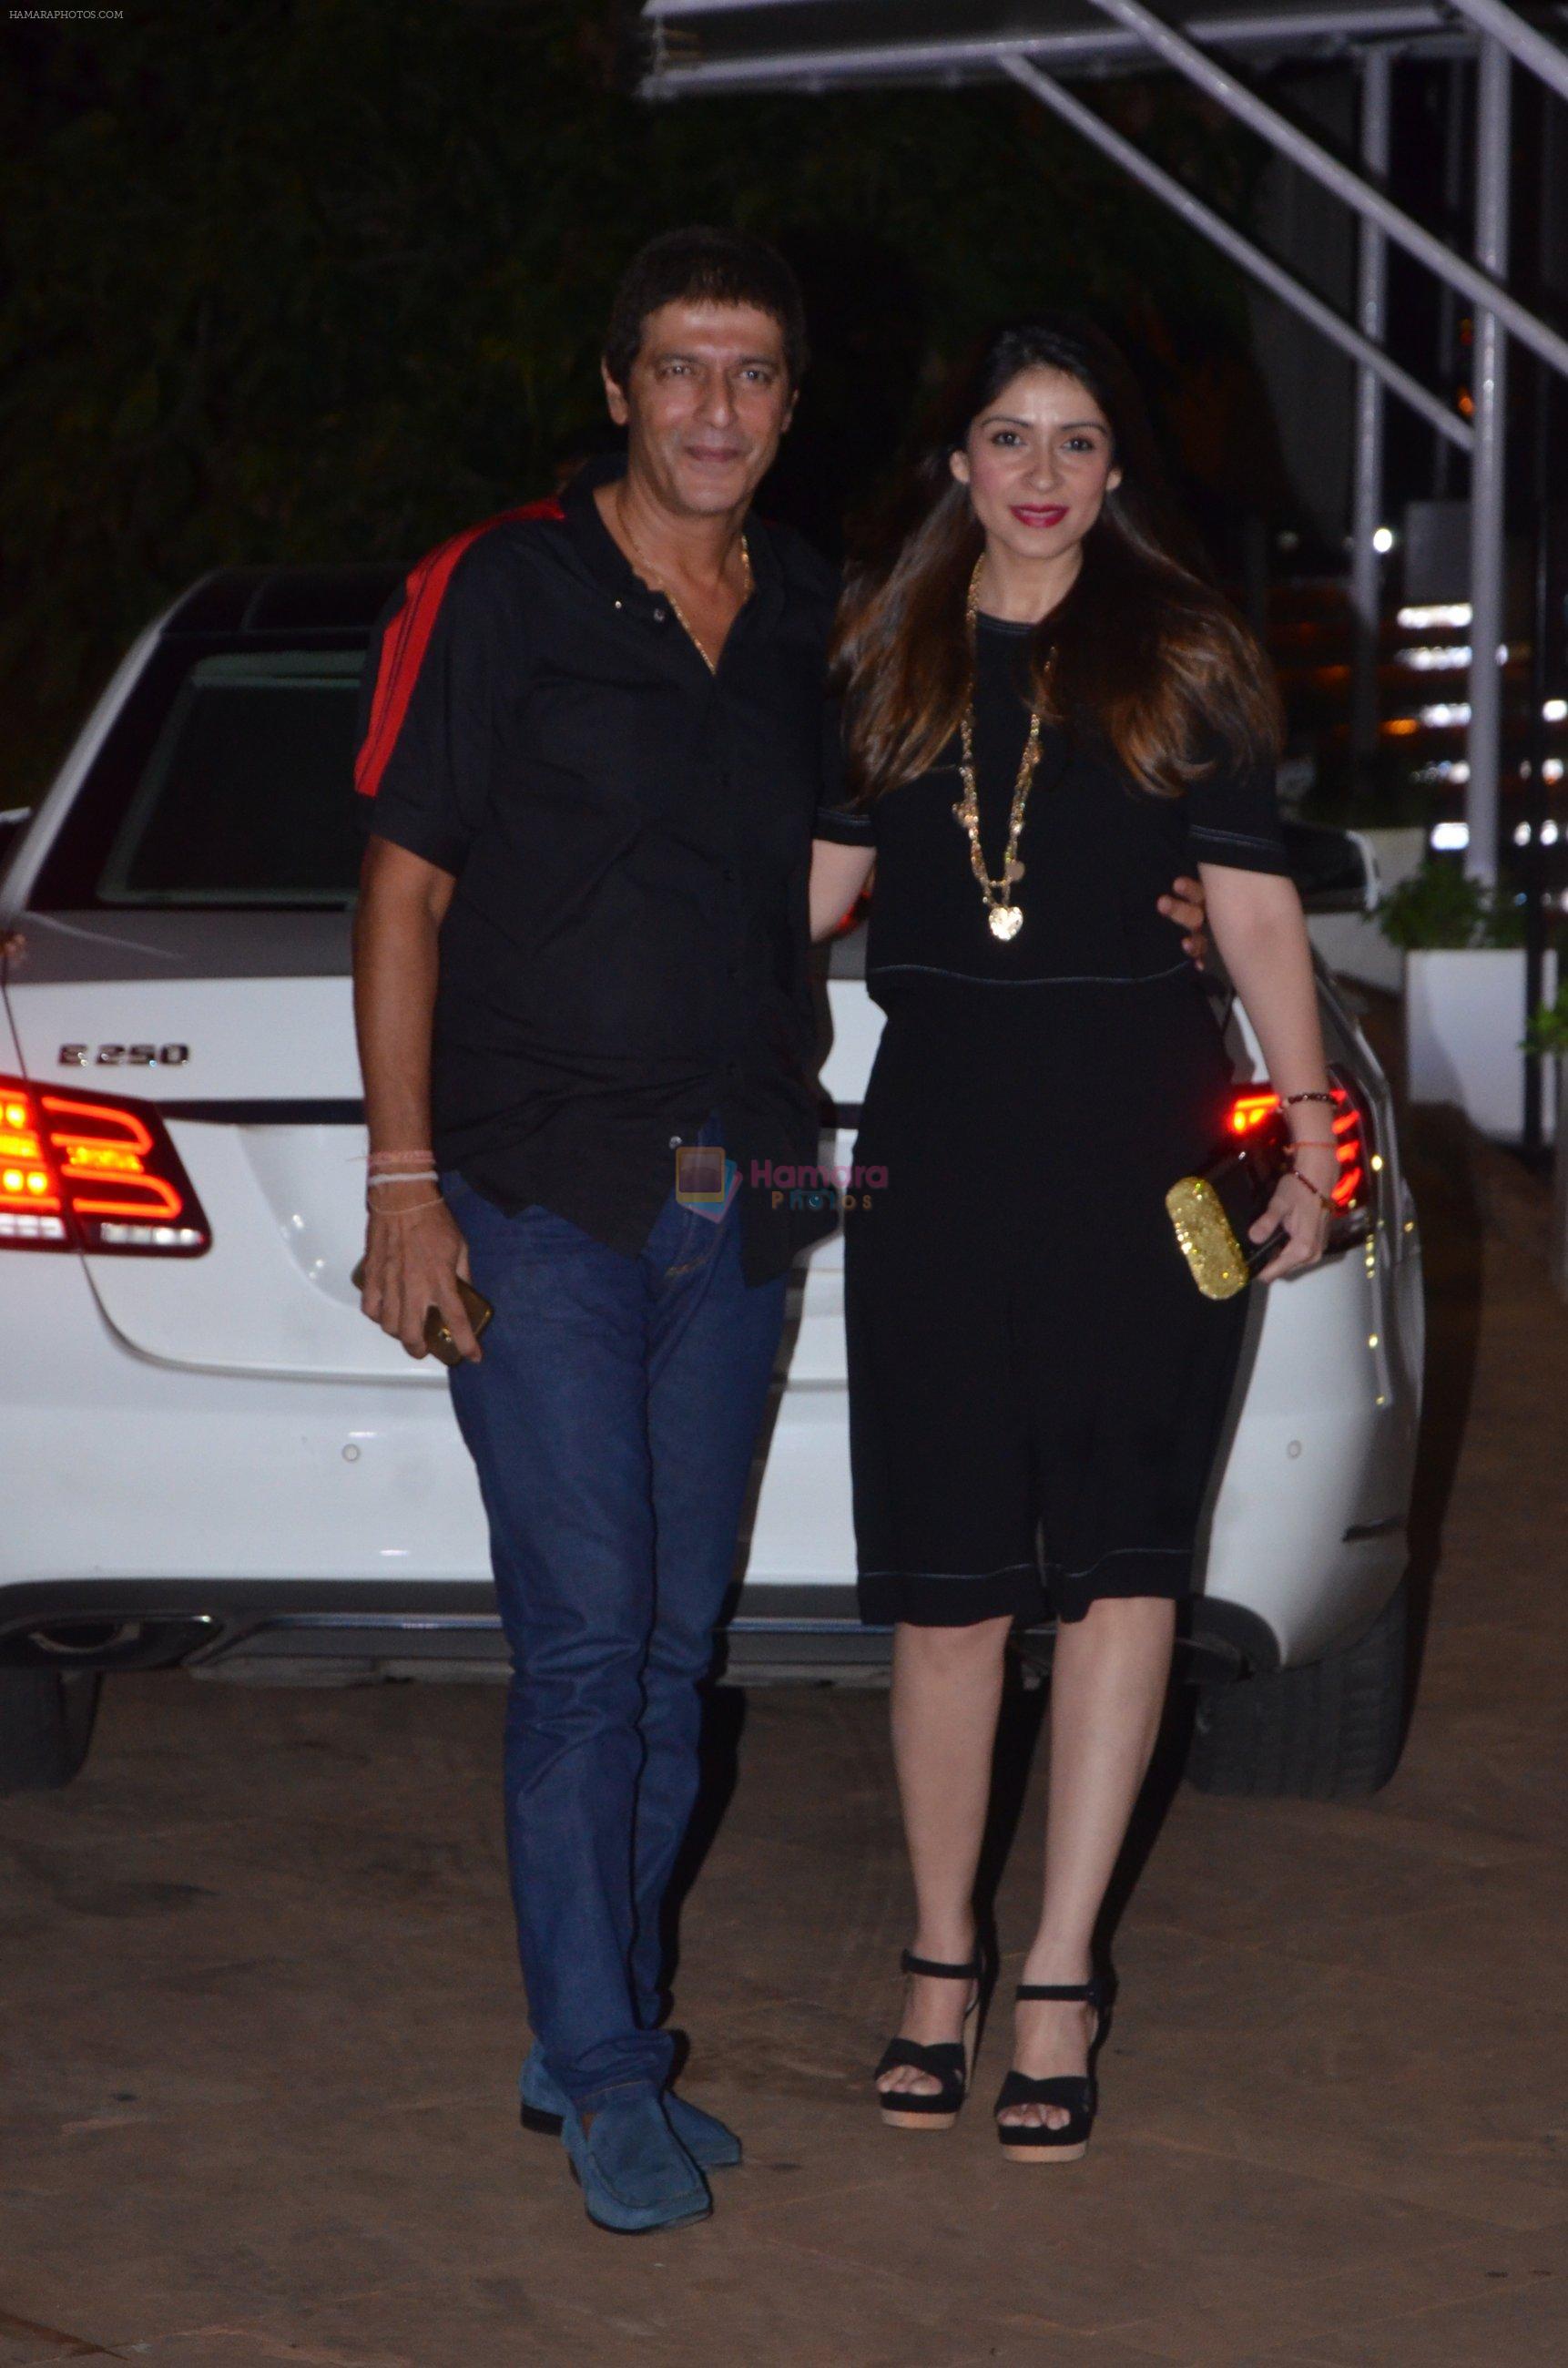 Chunky Pandey at Reema jain bday party in Amadeus NCPA on 28th Sept 2016